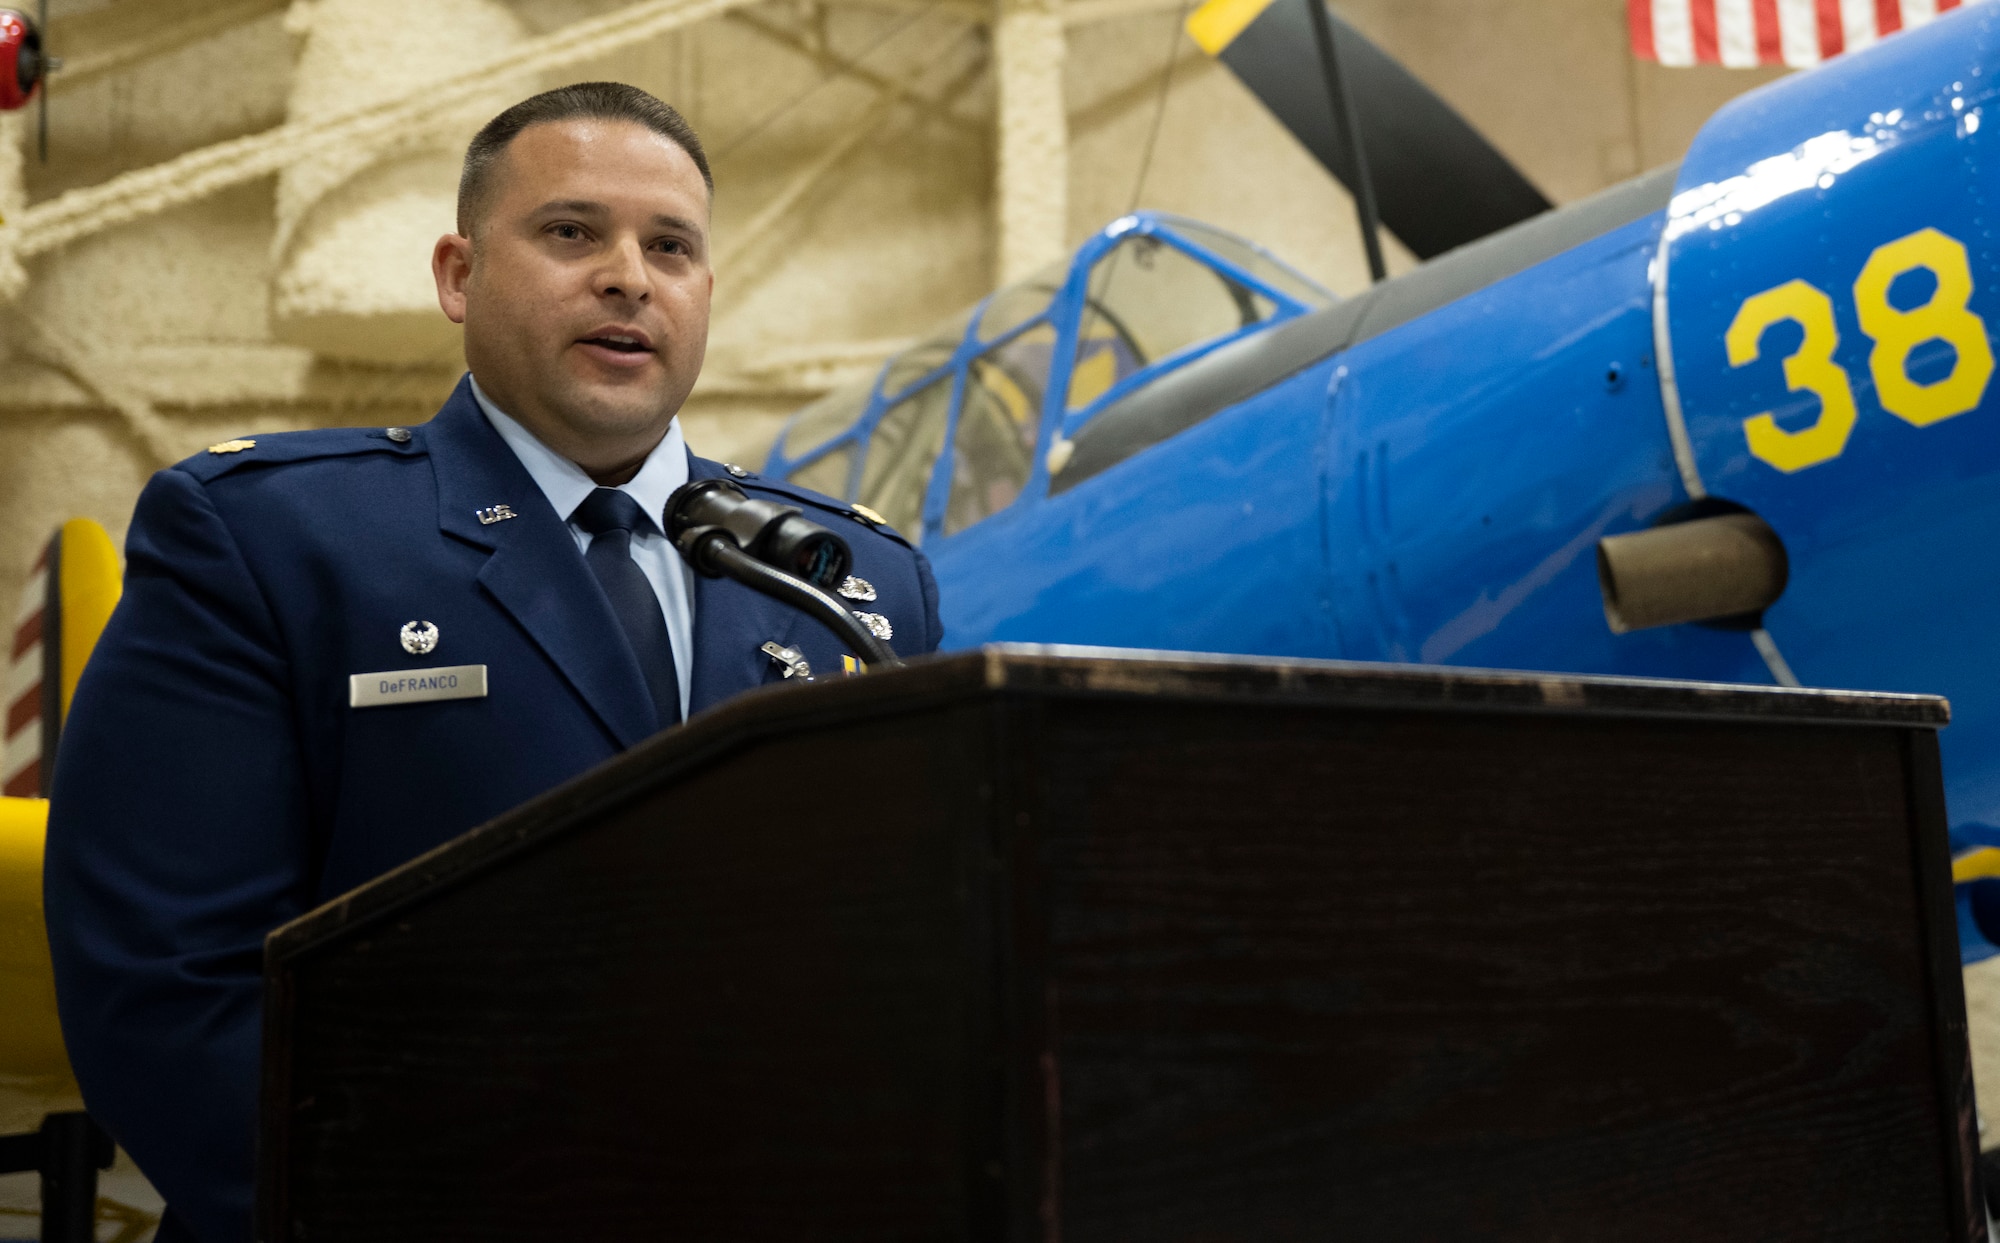 U.S. Air Force Maj Nicholas DeFranco, outgoing 28th Comptroller Squadron commander, gives a speech during a change of command ceremony at Ellsworth Air Force Base, South Dakota, June 15, 2023.